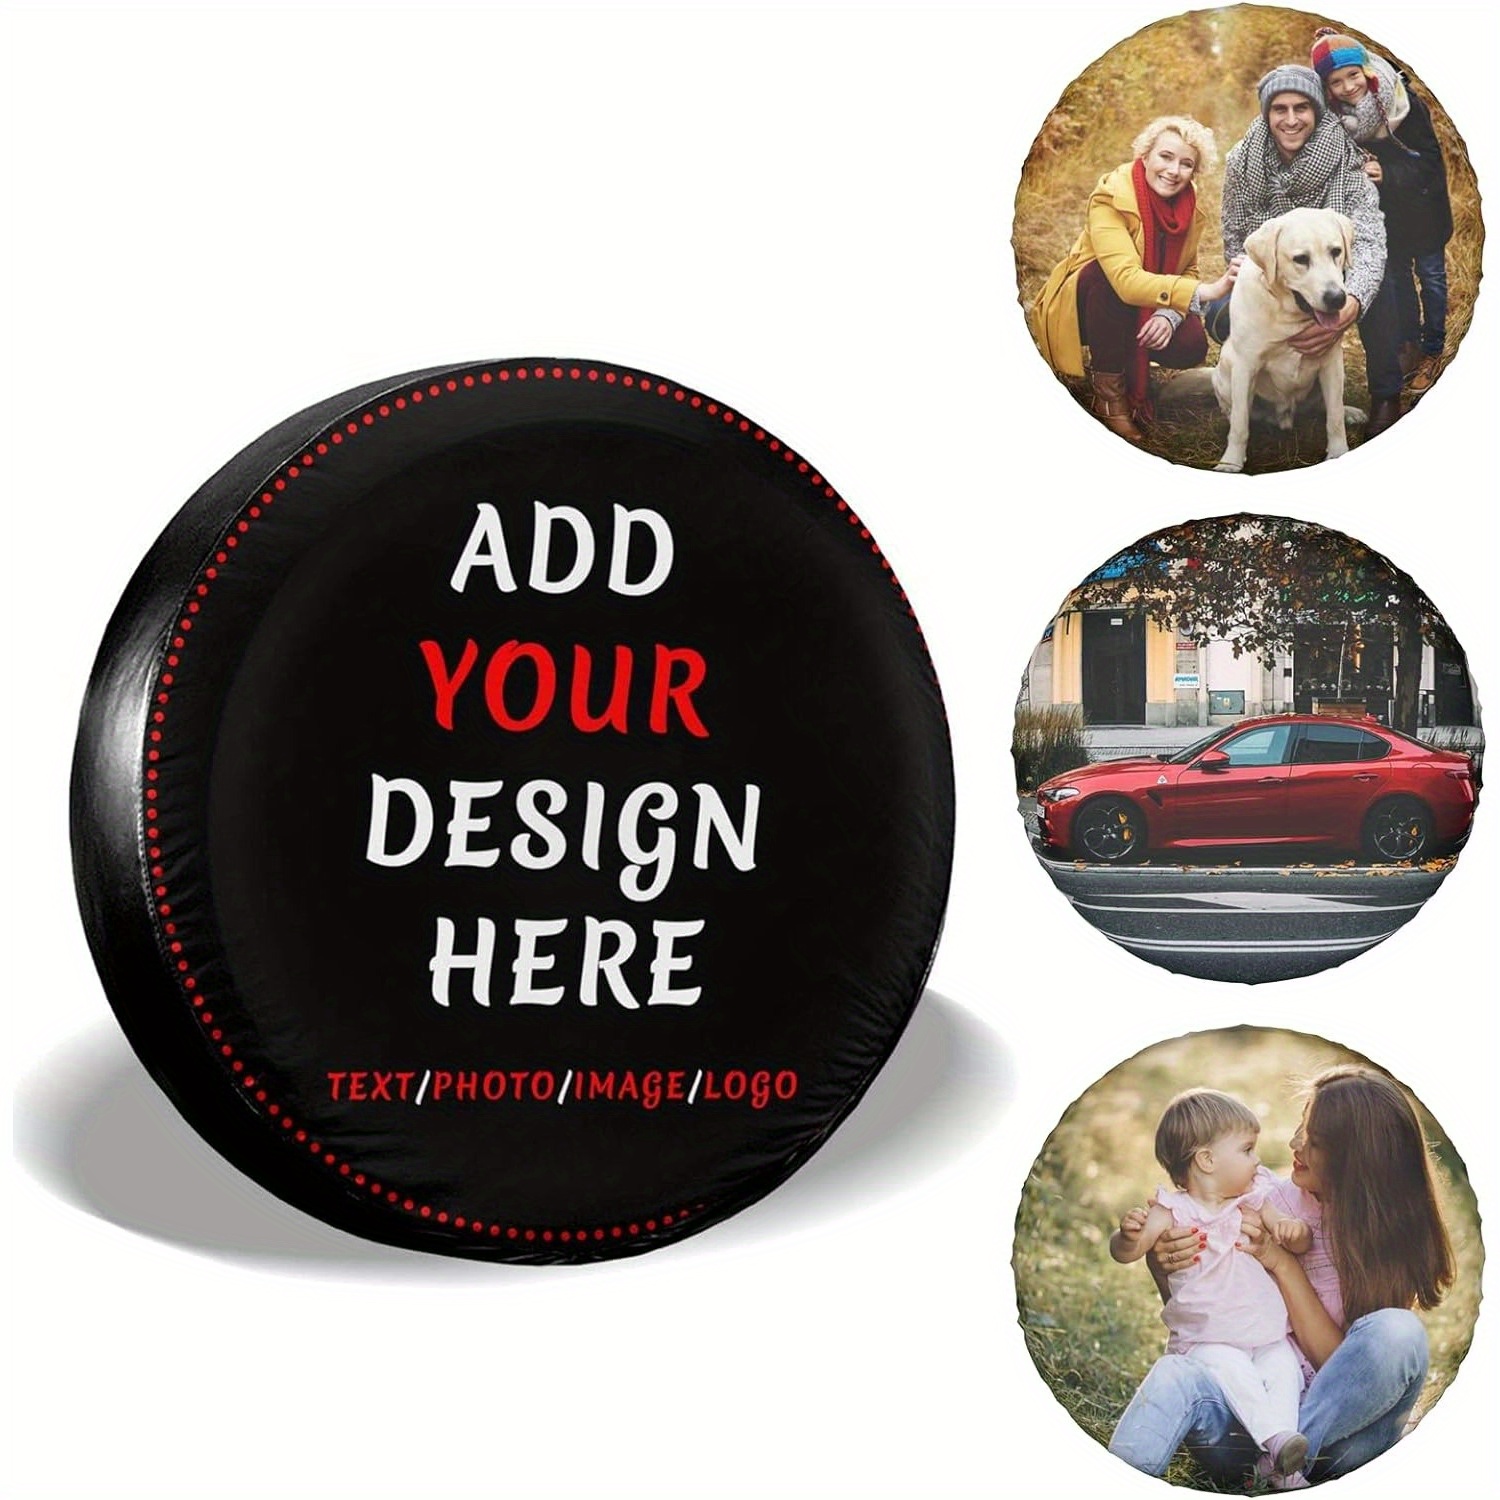 

Customizable Polyester Spare Tire Cover - Waterproof & Dust-proof Wheel Protector, Universal Fit For Trailers, Rvs, Suvs & Trucks, Personalize With Your Own Image